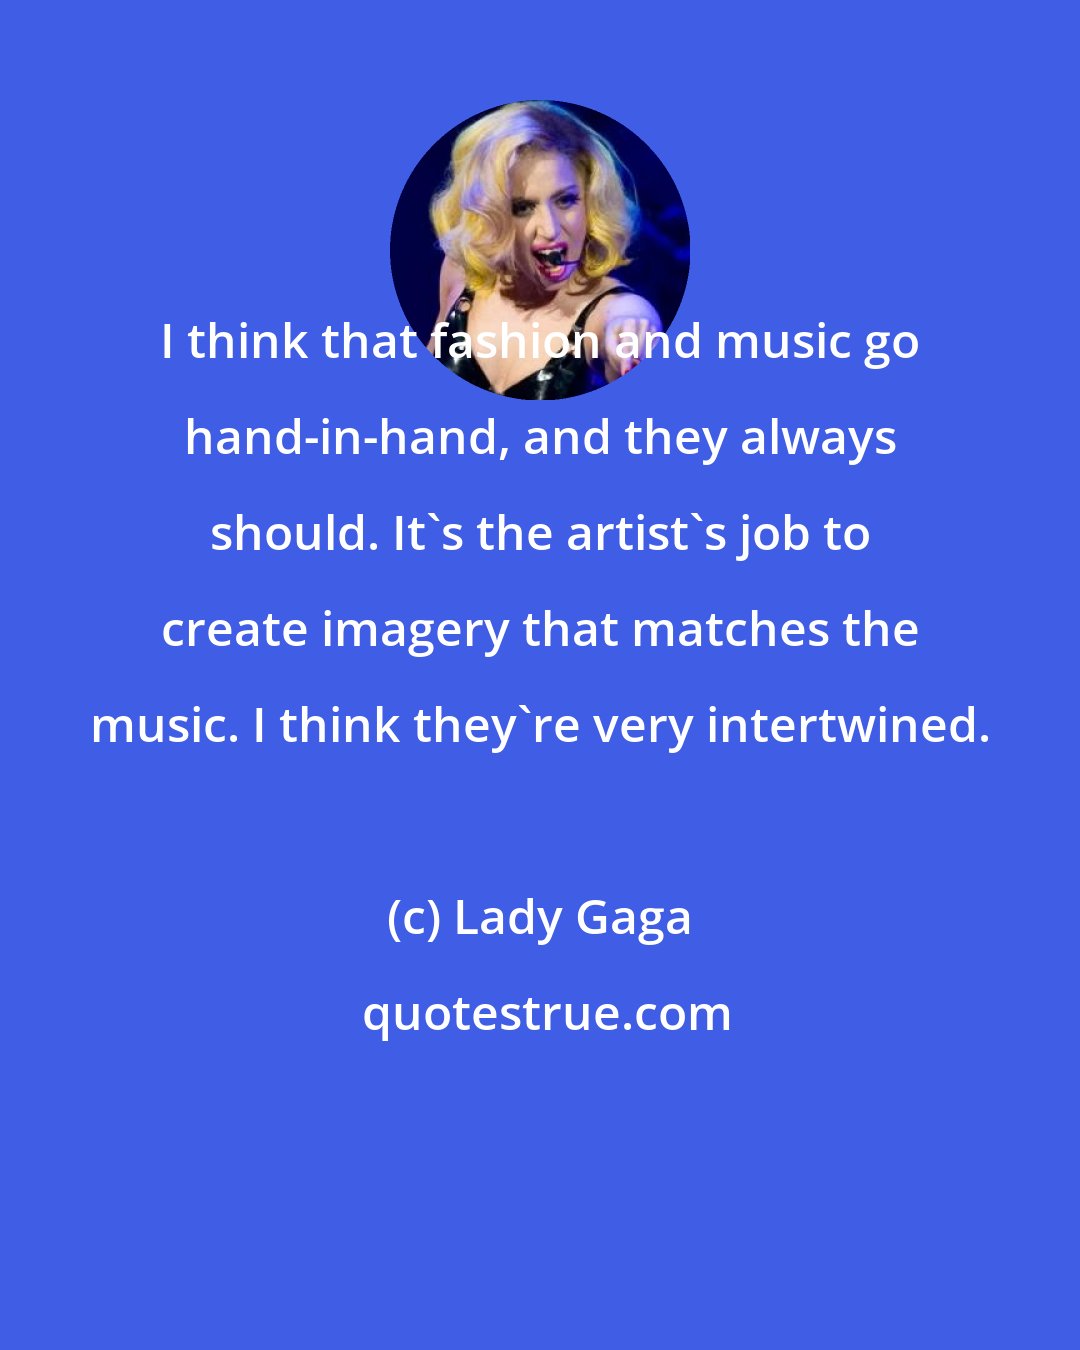 Lady Gaga: I think that fashion and music go hand-in-hand, and they always should. It's the artist's job to create imagery that matches the music. I think they're very intertwined.